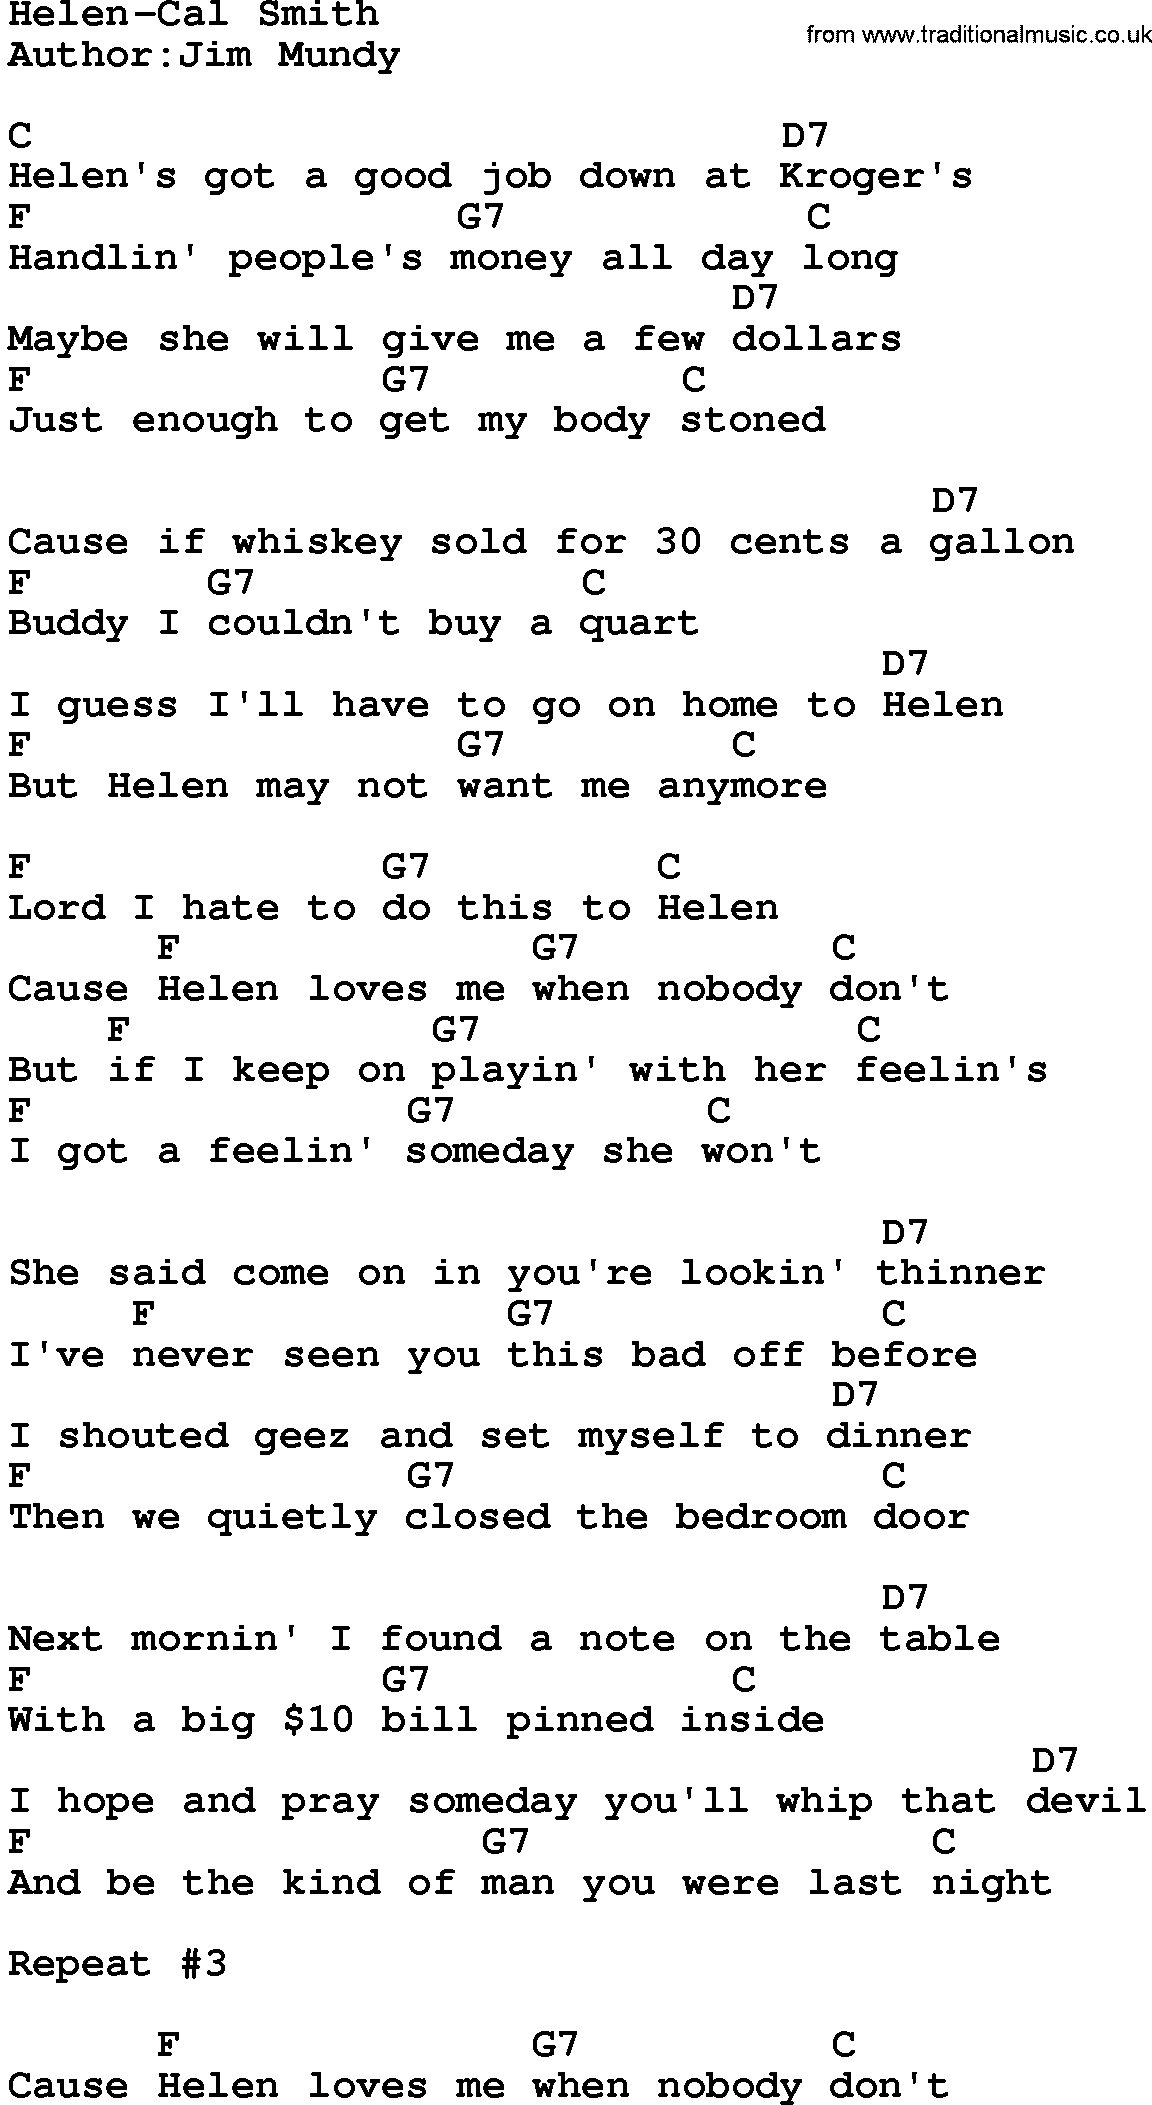 Country music song: Helen-Cal Smith lyrics and chords